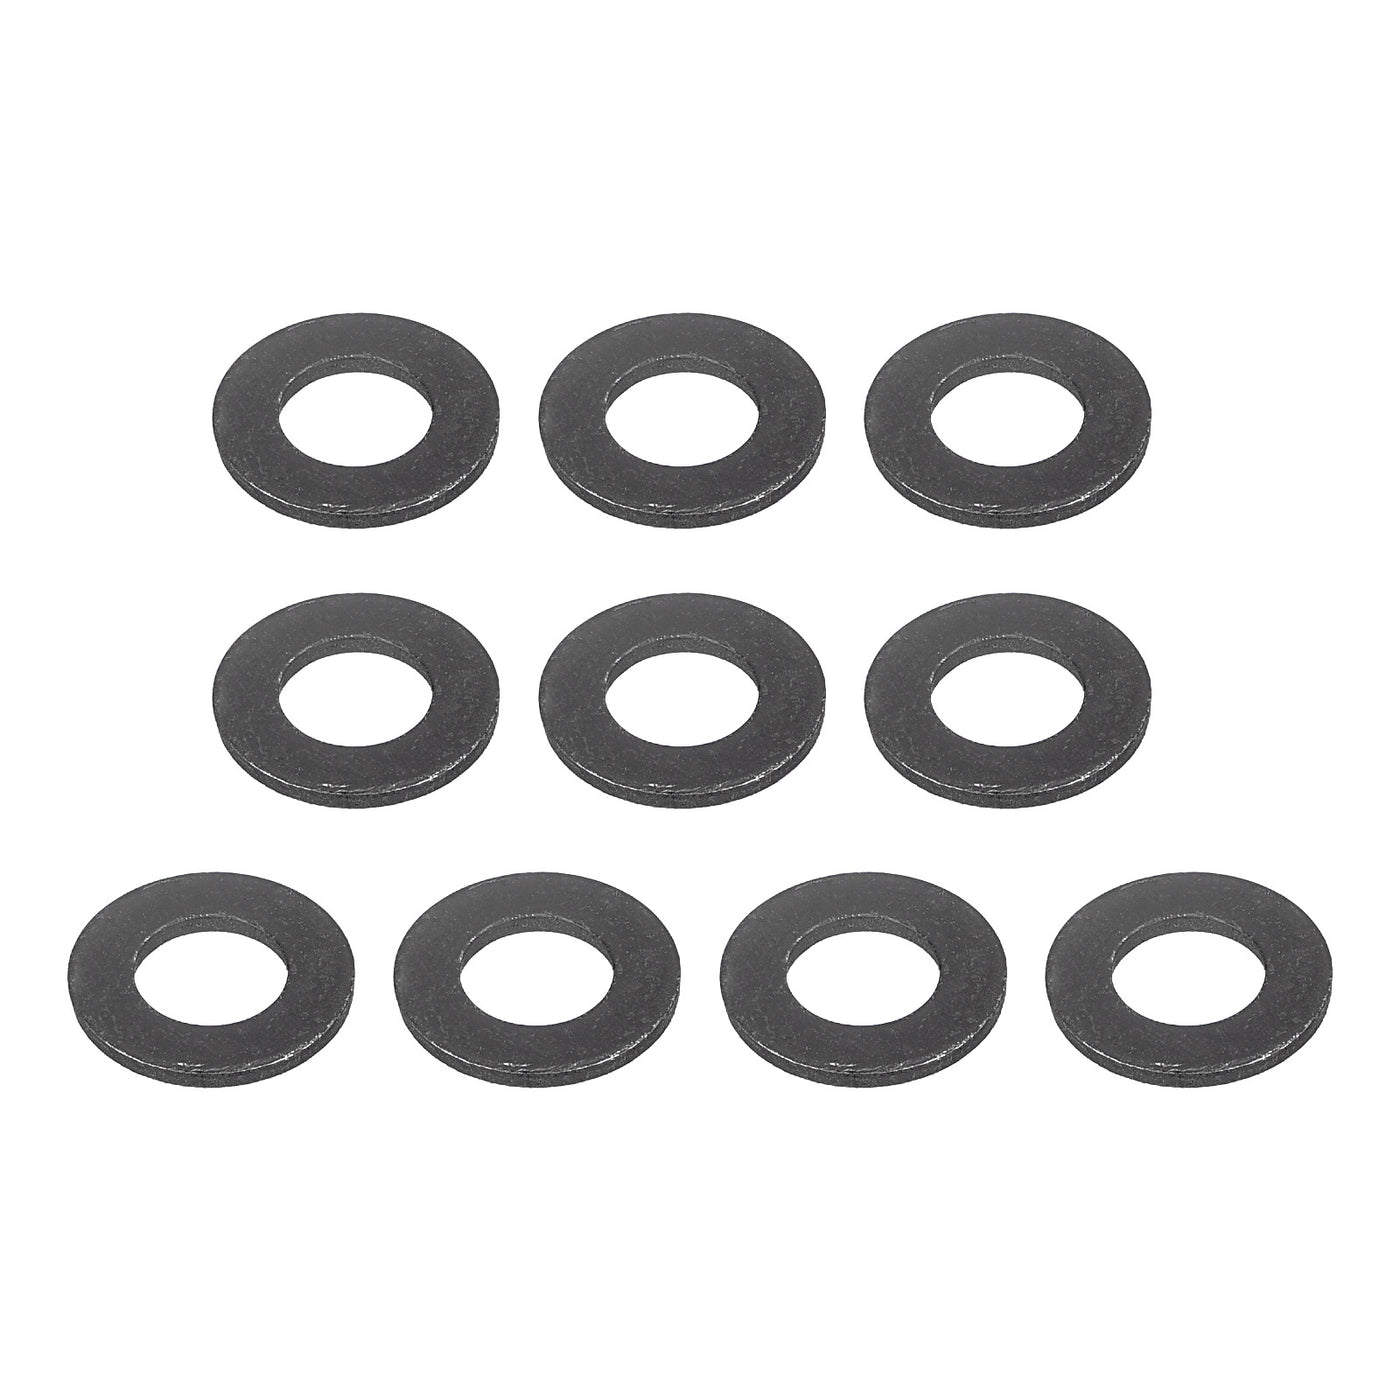 uxcell Uxcell M8 Carbon Steel Flat Washer 25pcs 8.4x16x1.5mm Grade 8.8 Alloy Steel Fasteners